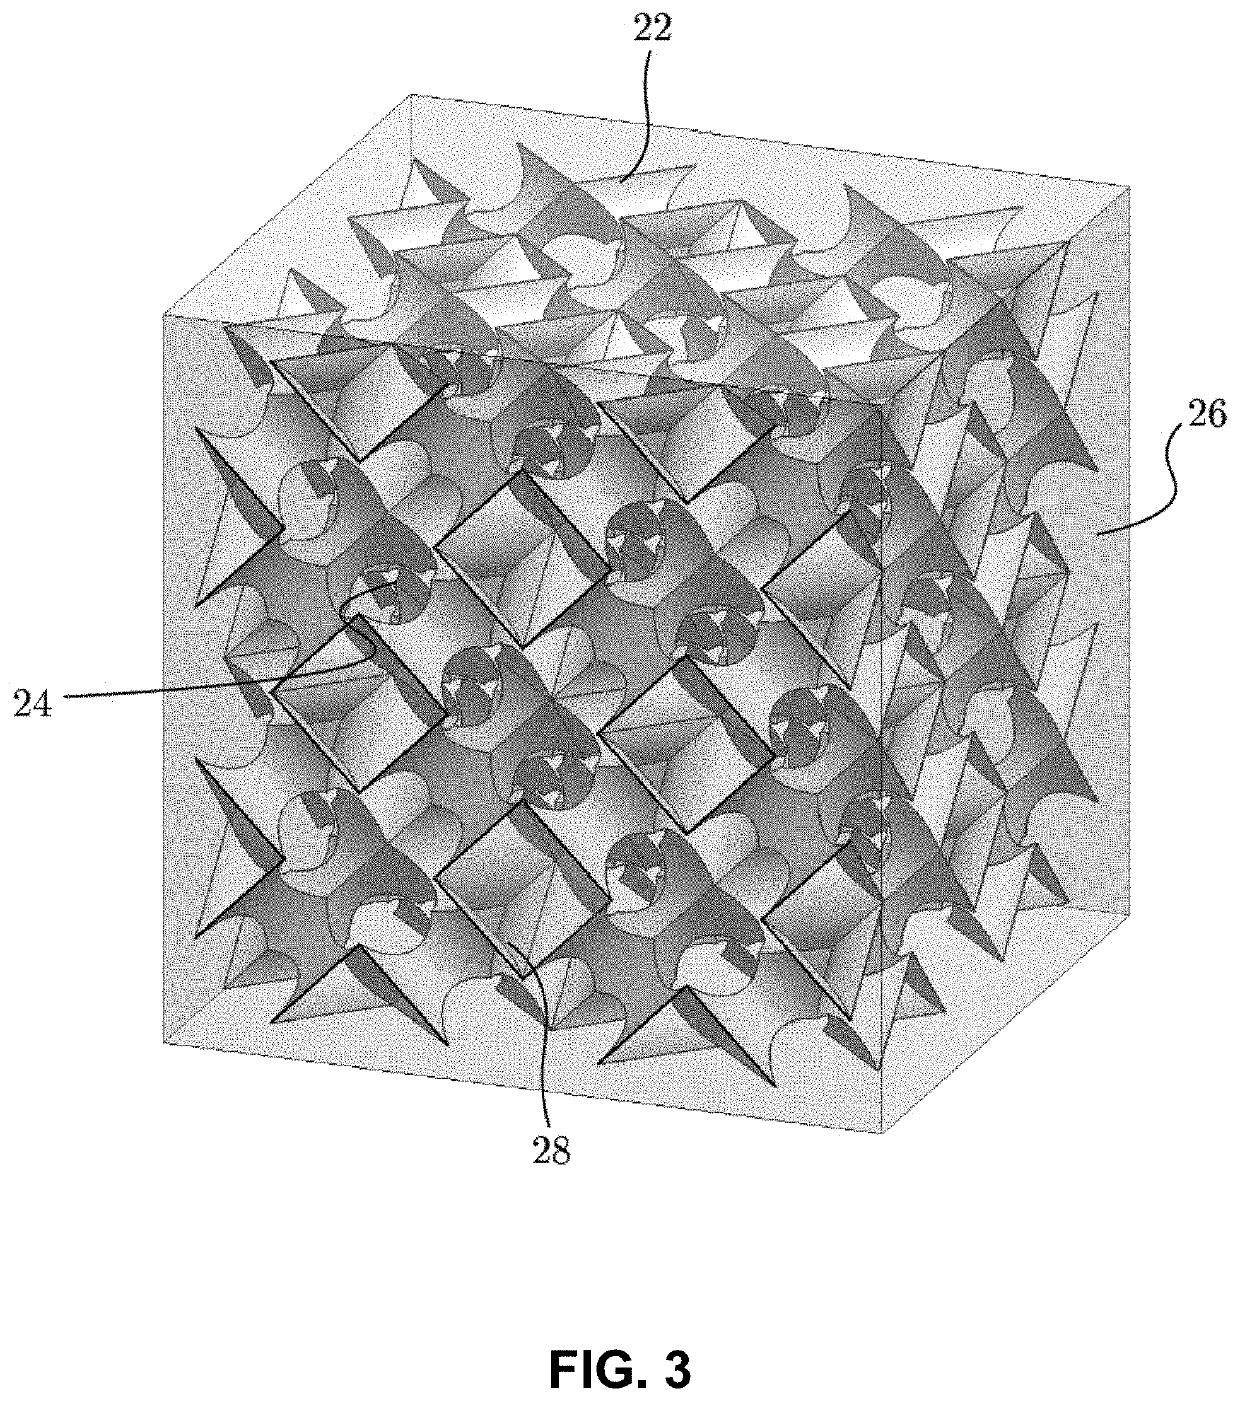 Fabrication and design of composites with architected layers